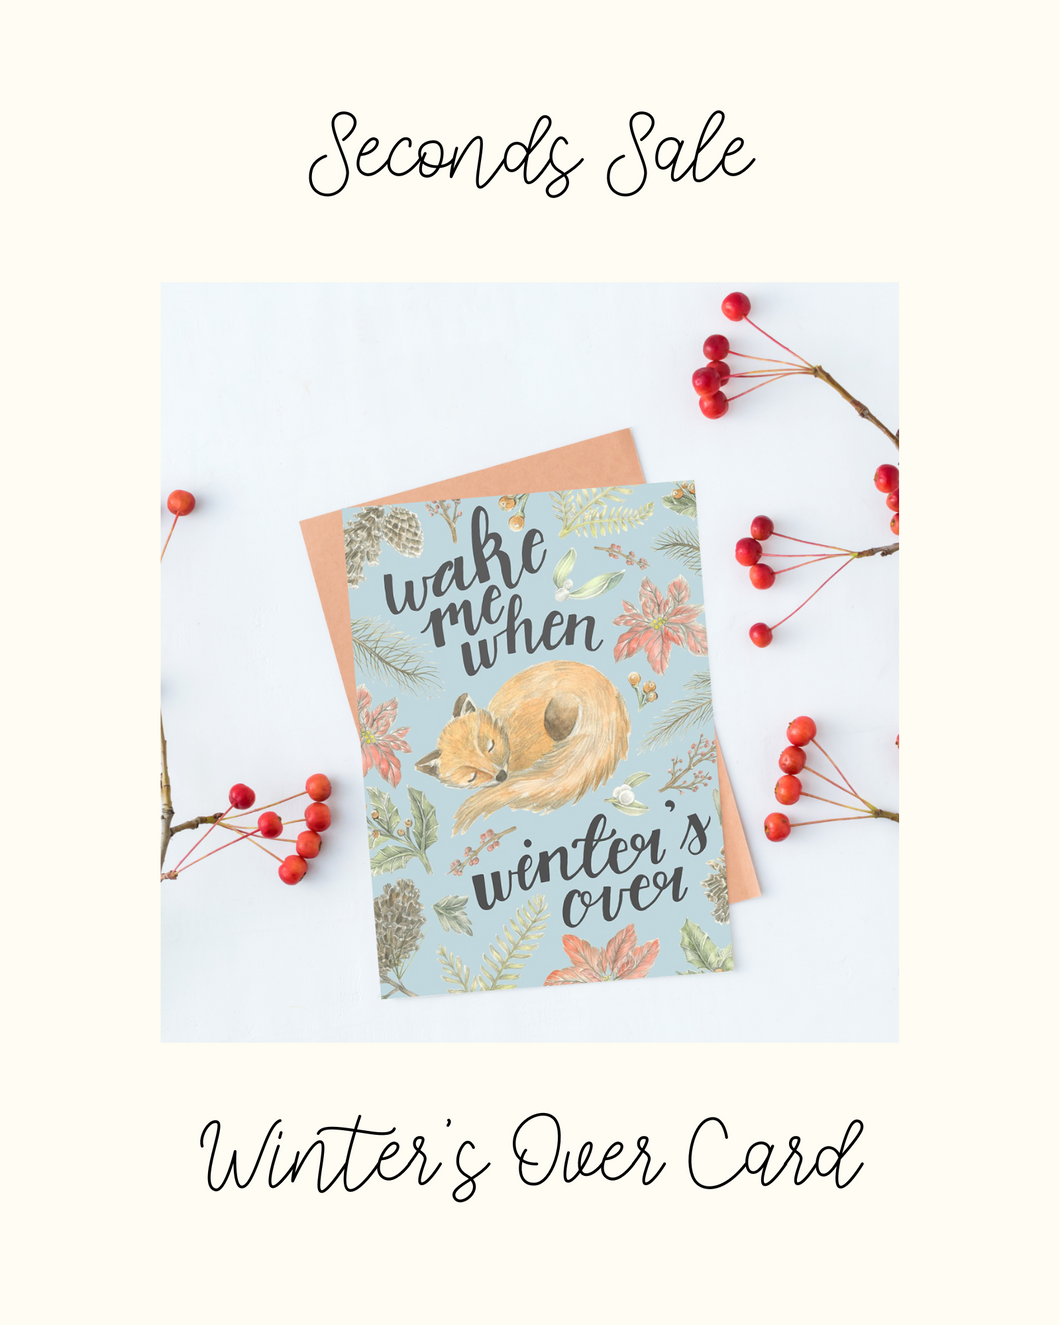 Wake me when winter's over card - Seconds Sale